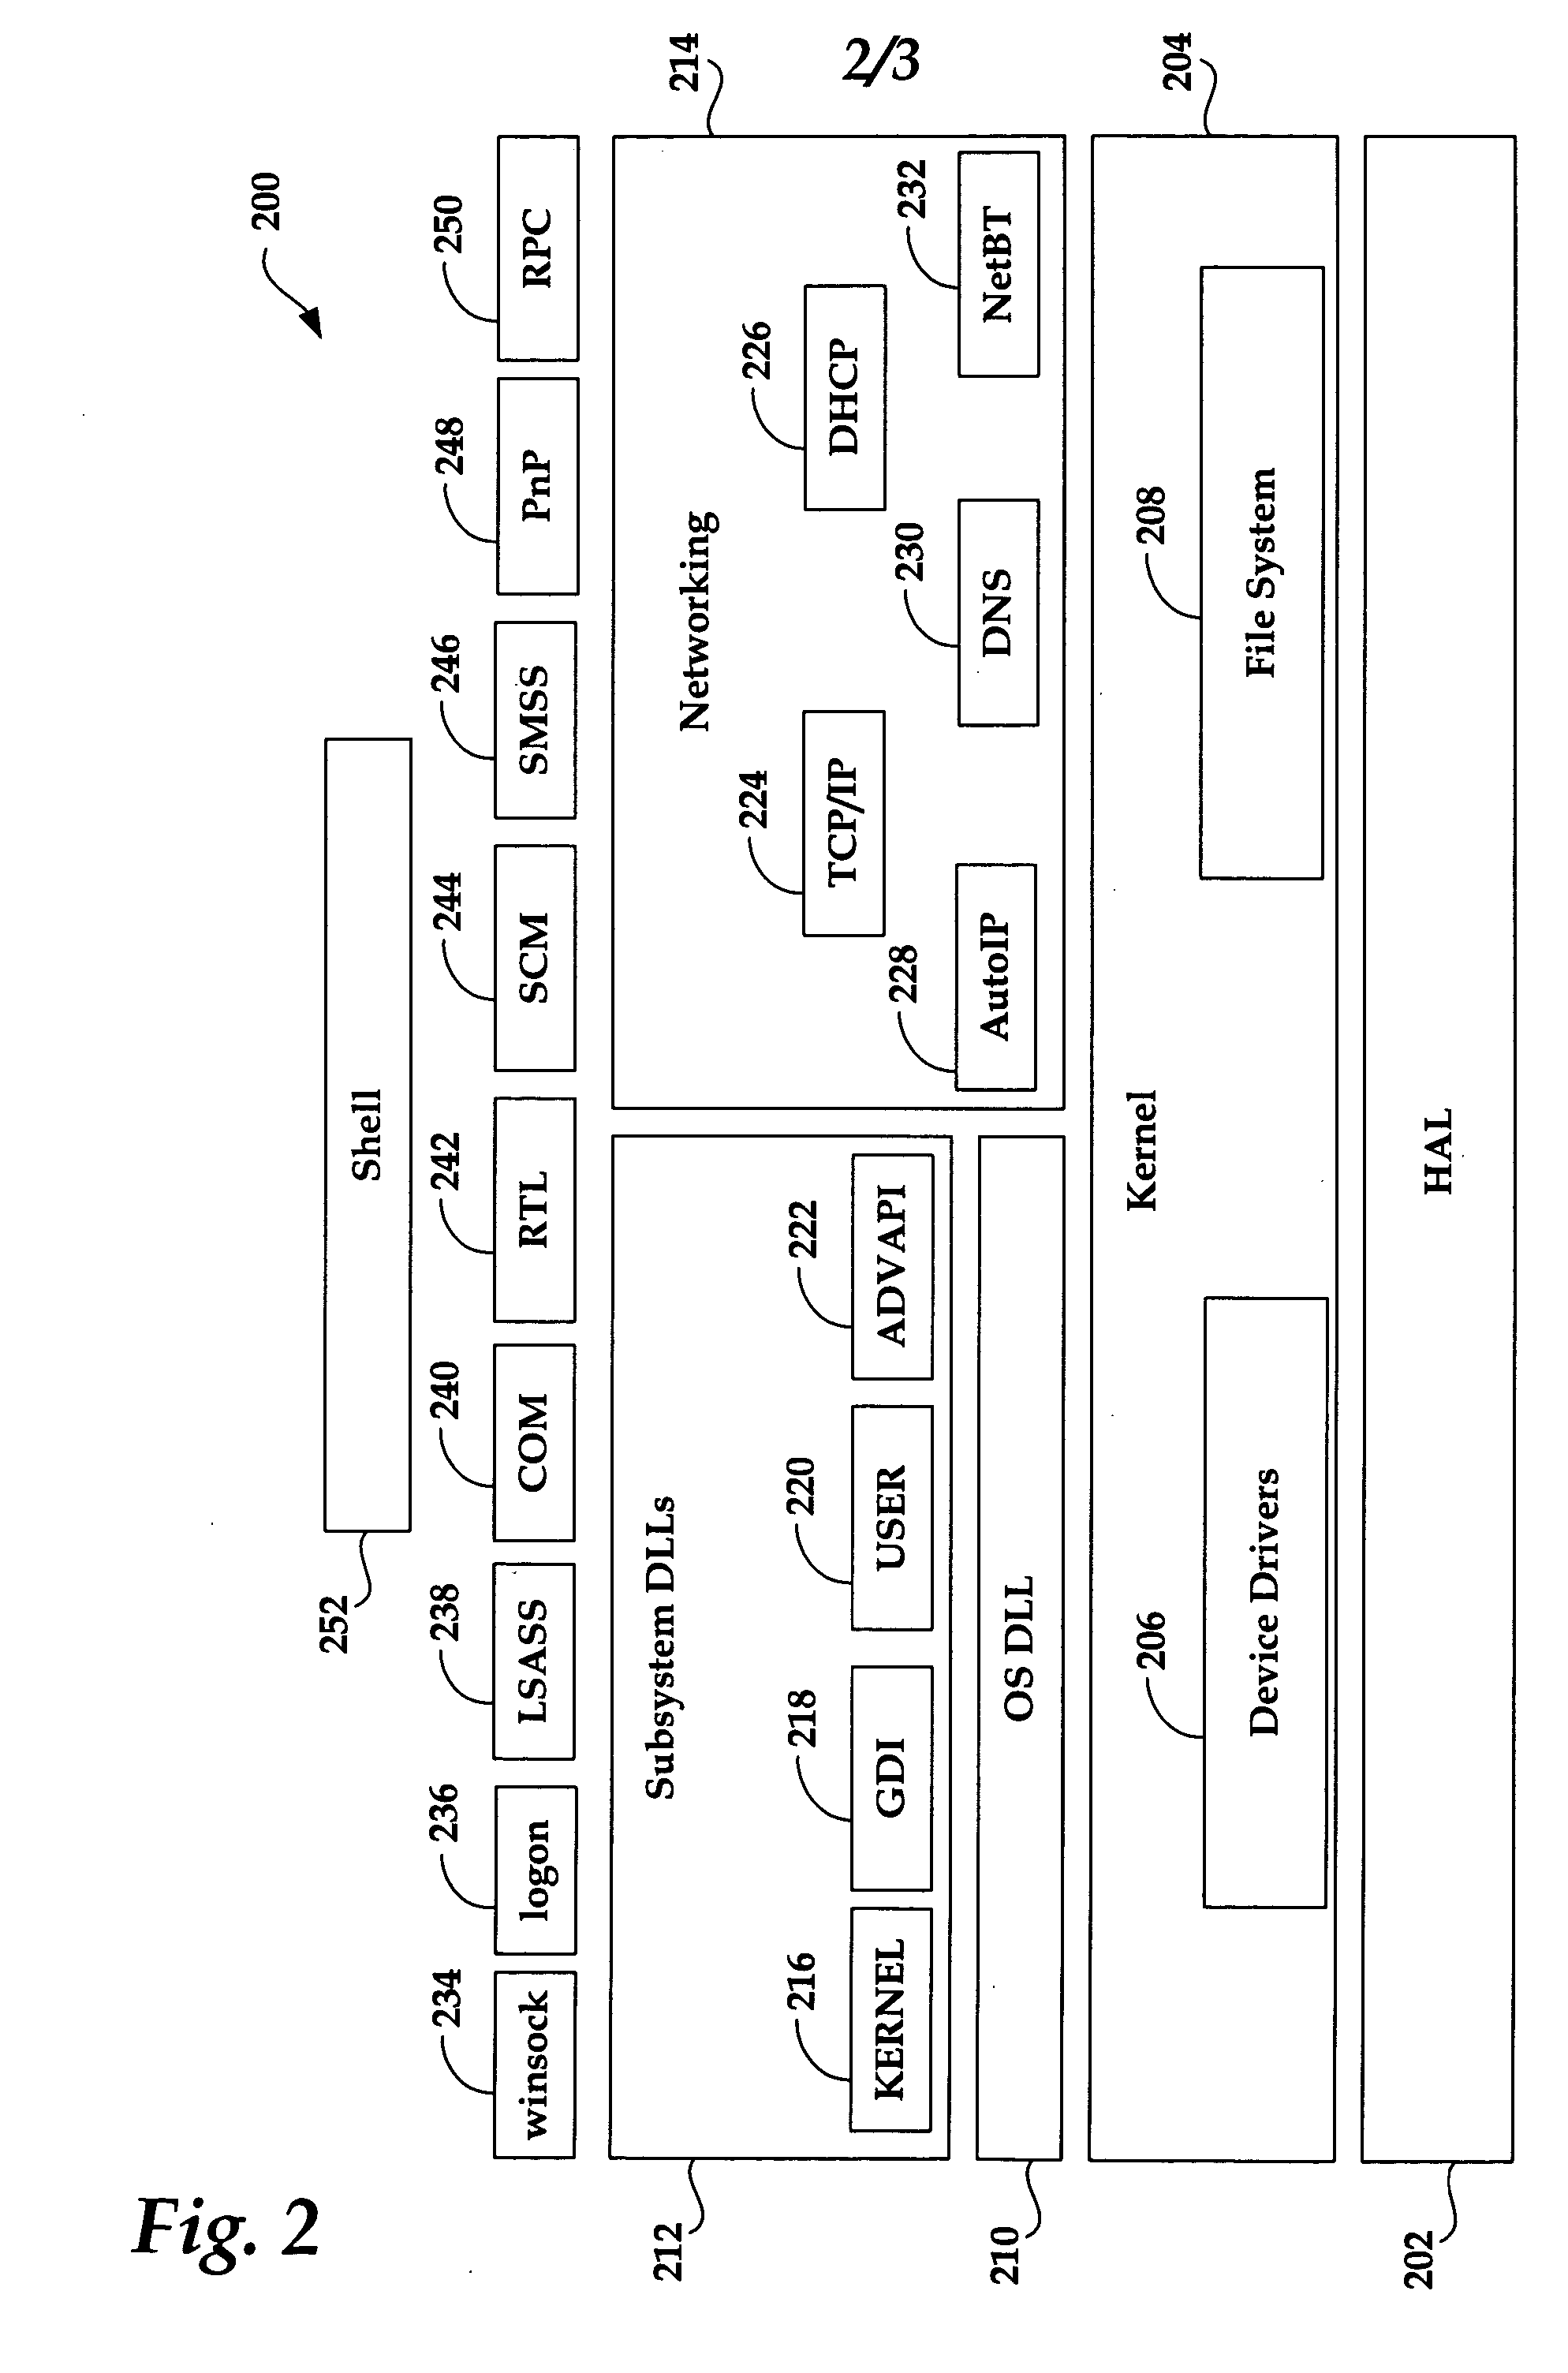 Method and system for providing a common operating system